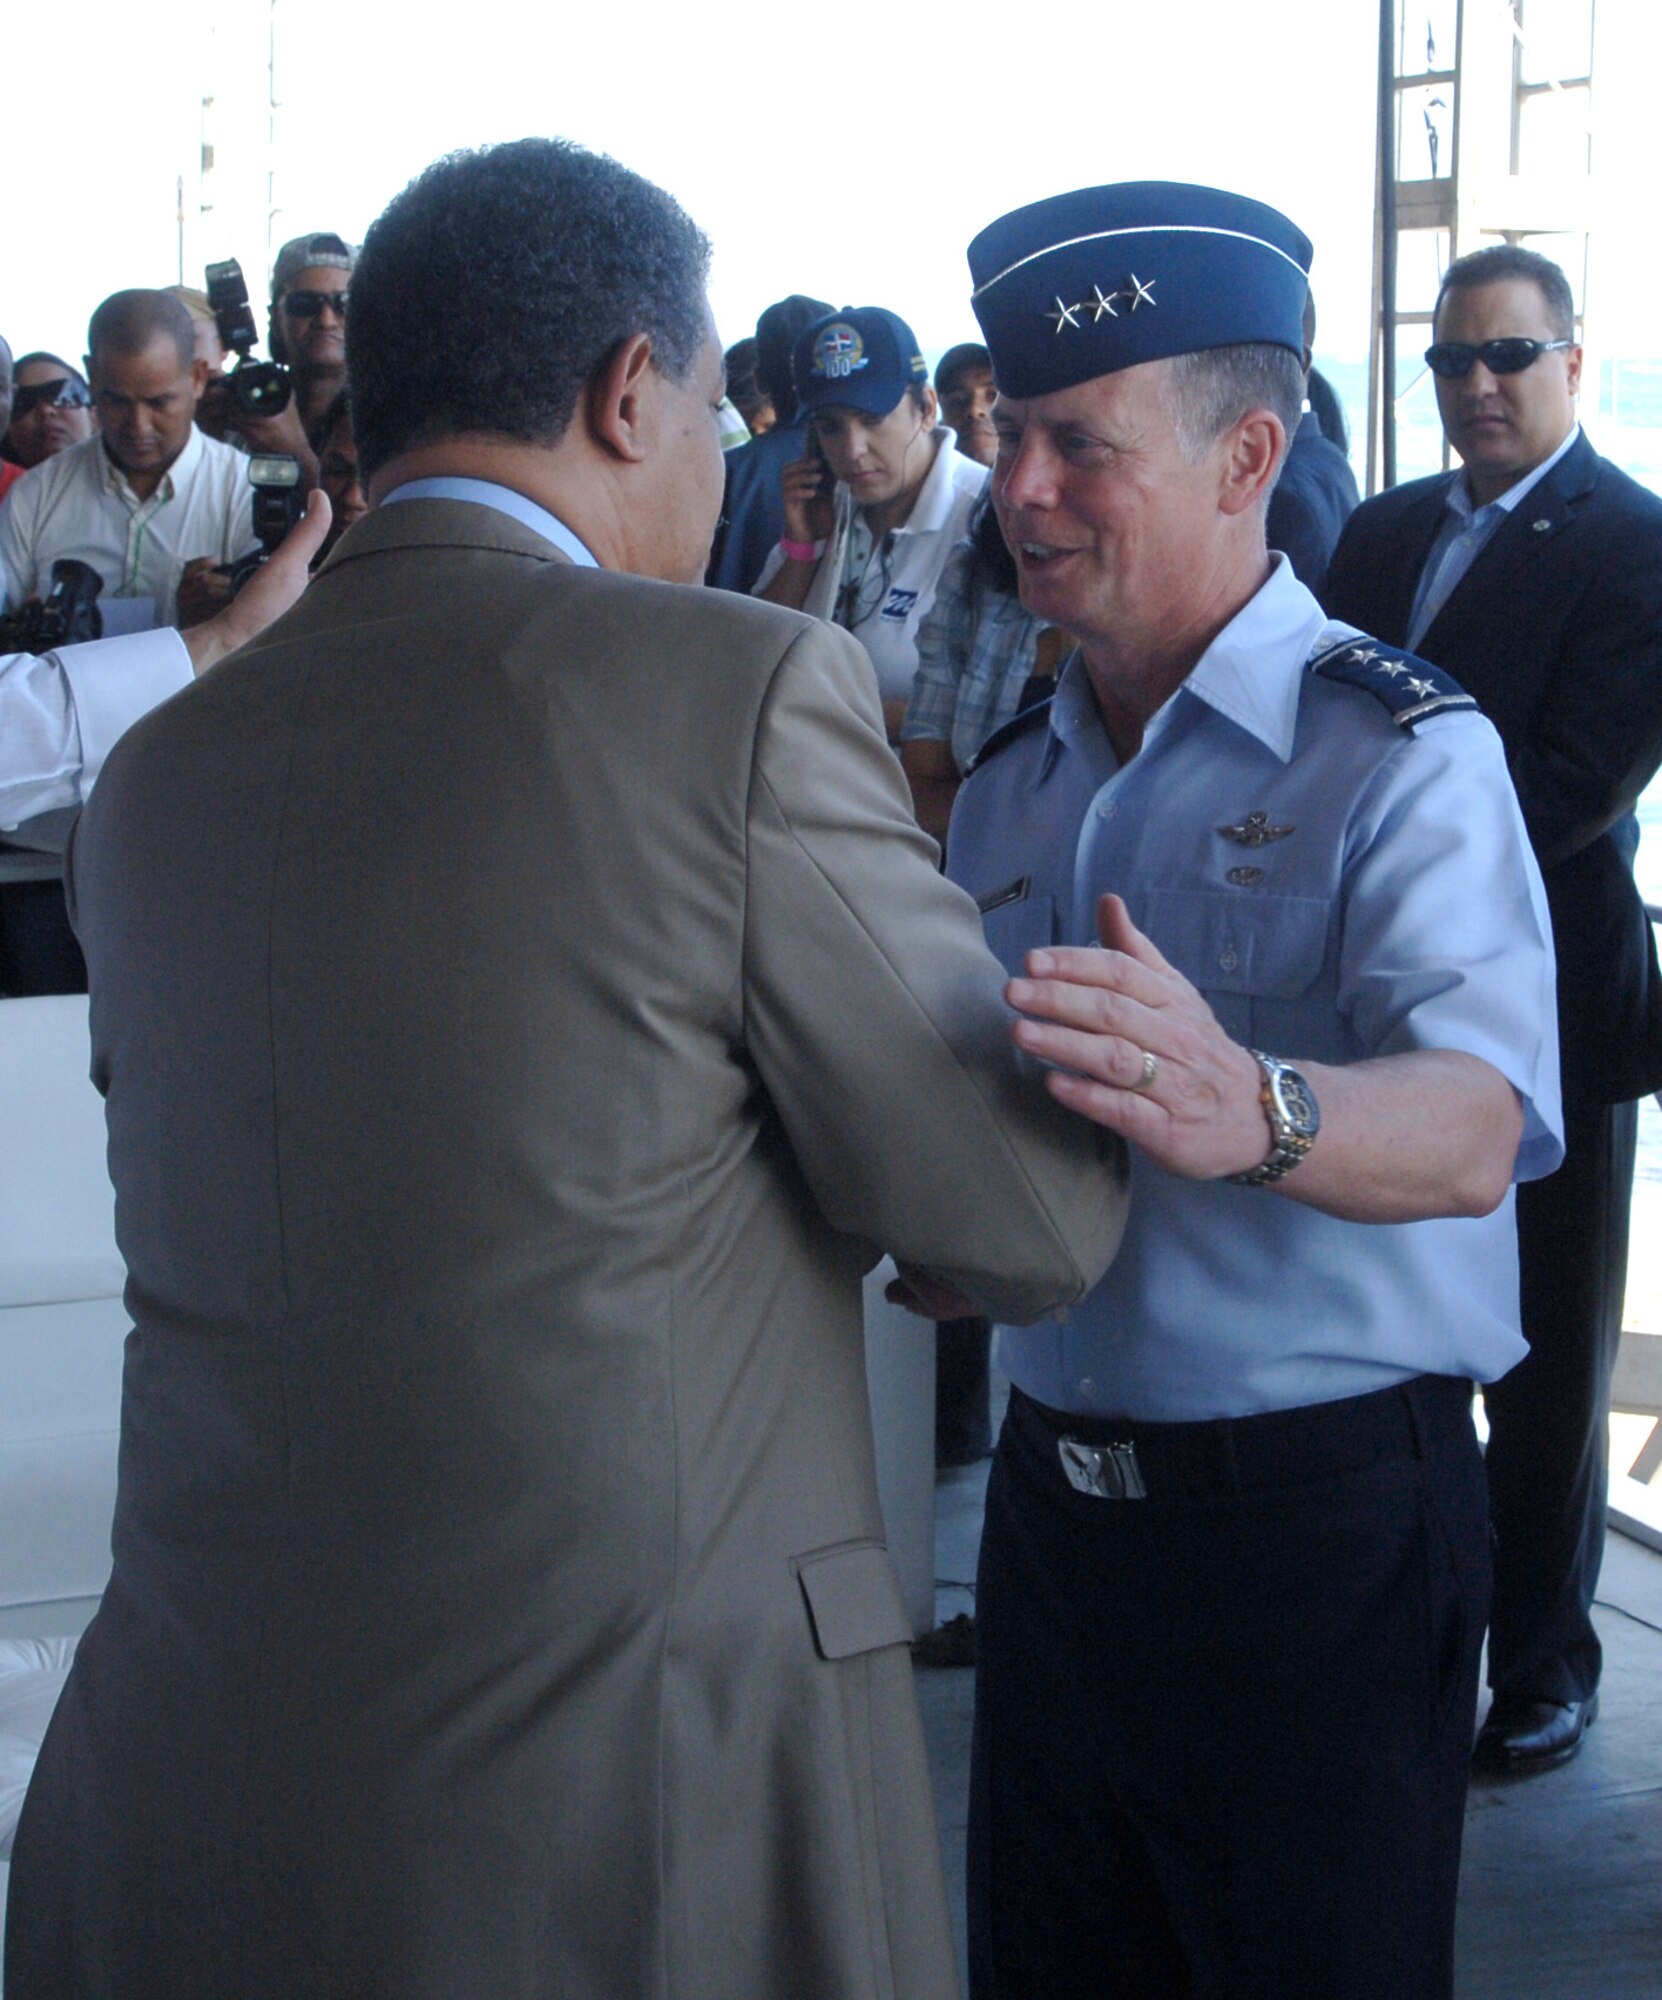 Dominican Republic President Leonel Fernandez (left) greets Lt. Gen. Glenn Spears, 12th Air Force (Air Forces Southern) commander, during The Great Air Show Mar. 26 in Santo Domingo, Dominican Republic. (U.S. Air Force photo/Tech. Sgt. Eric Petosky)